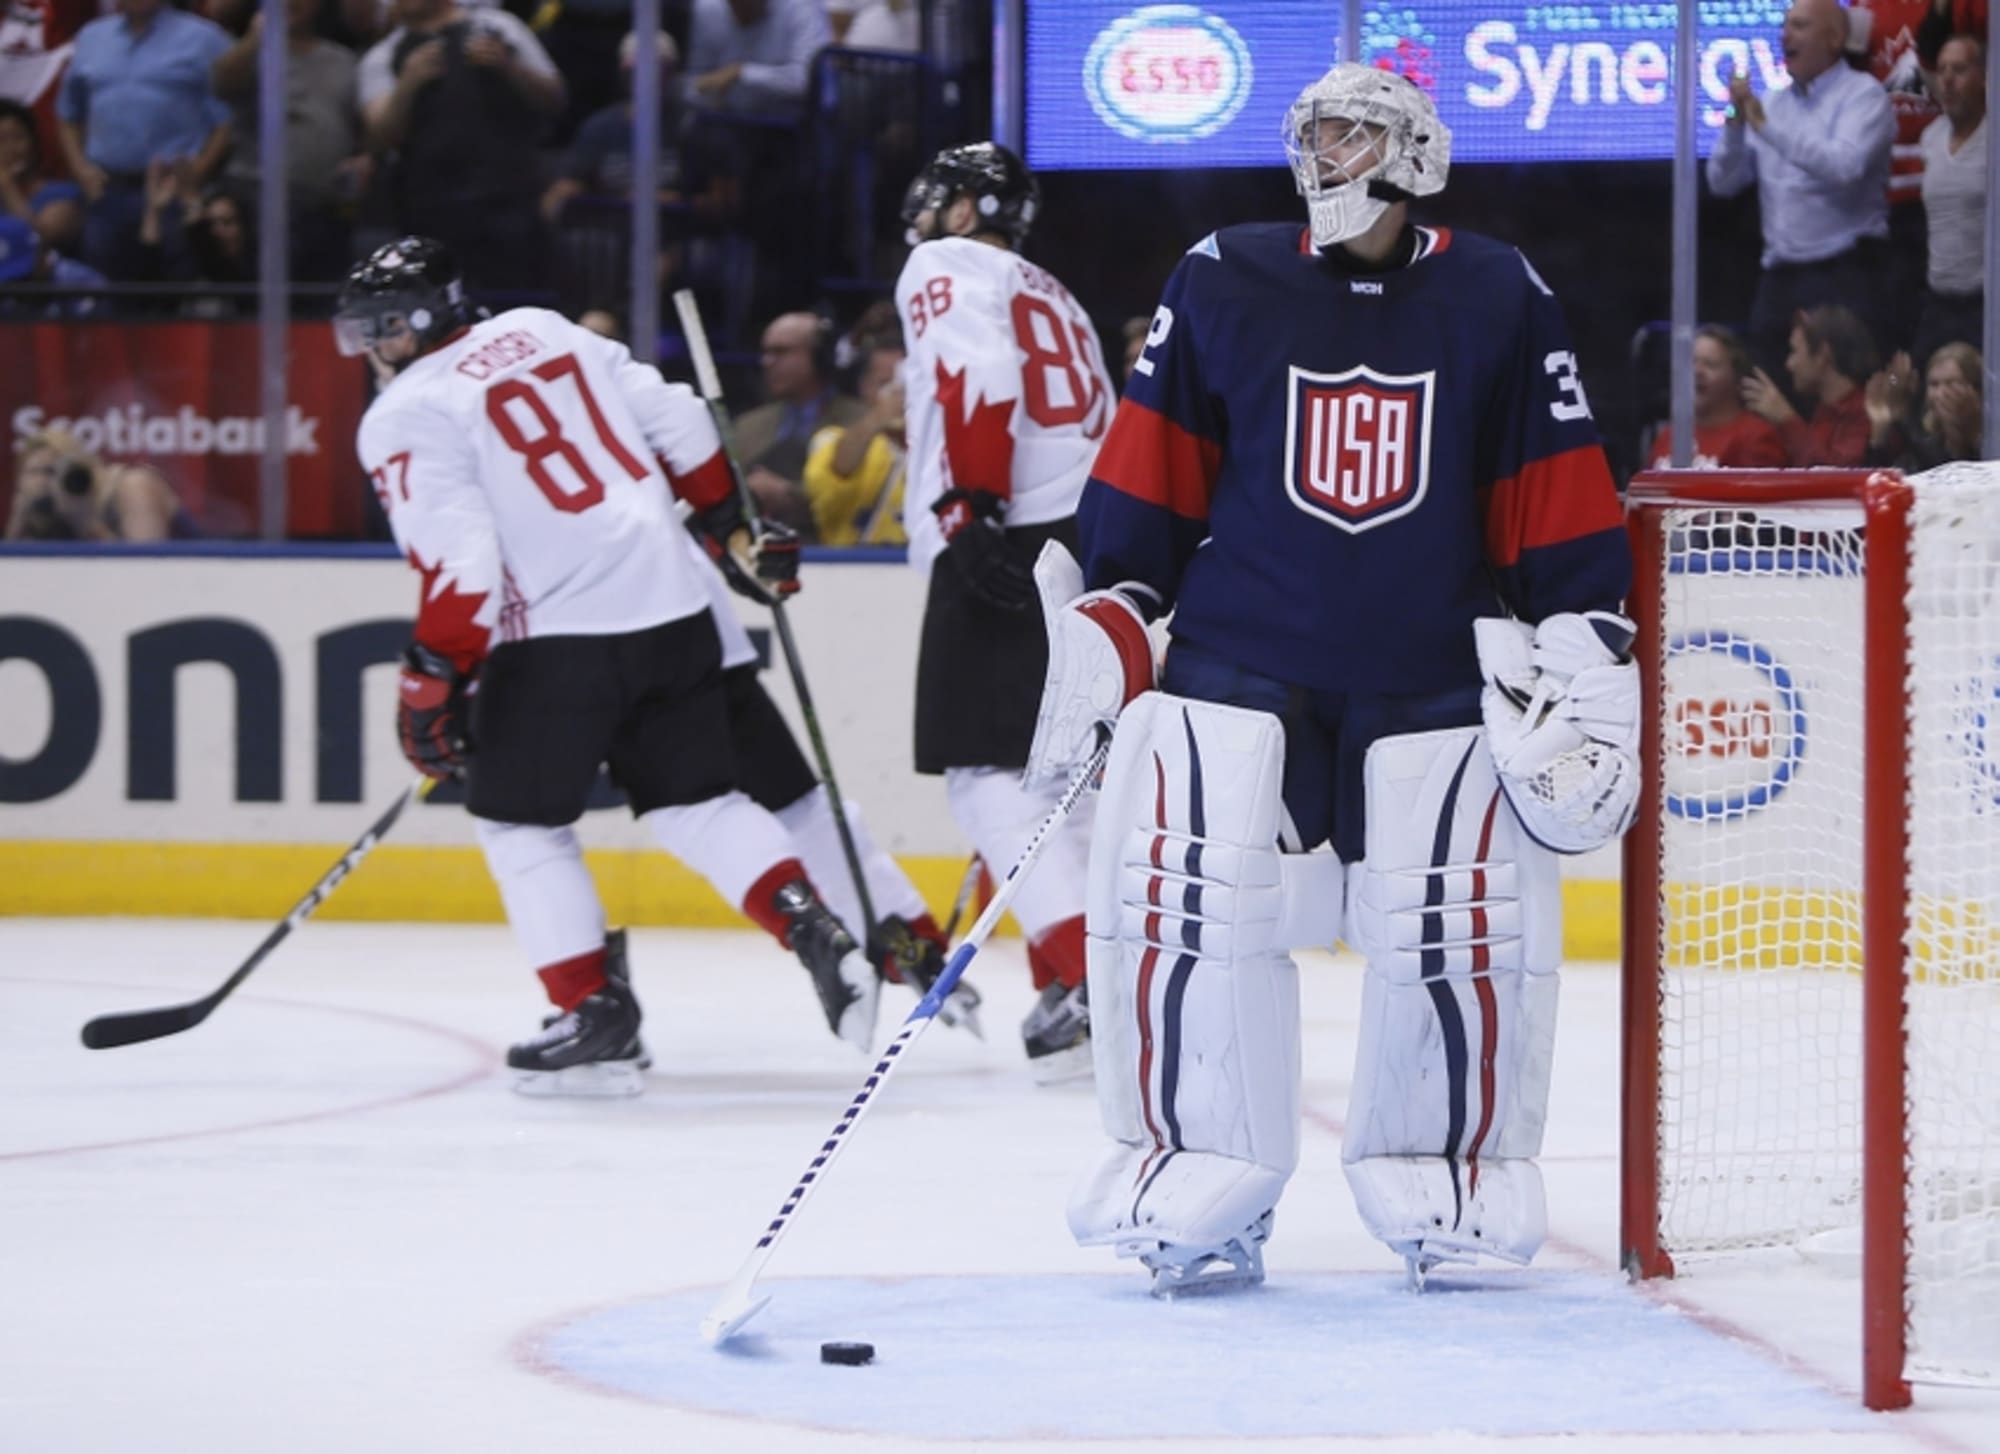 World Cup Hockey: Team North America Could Disappoint